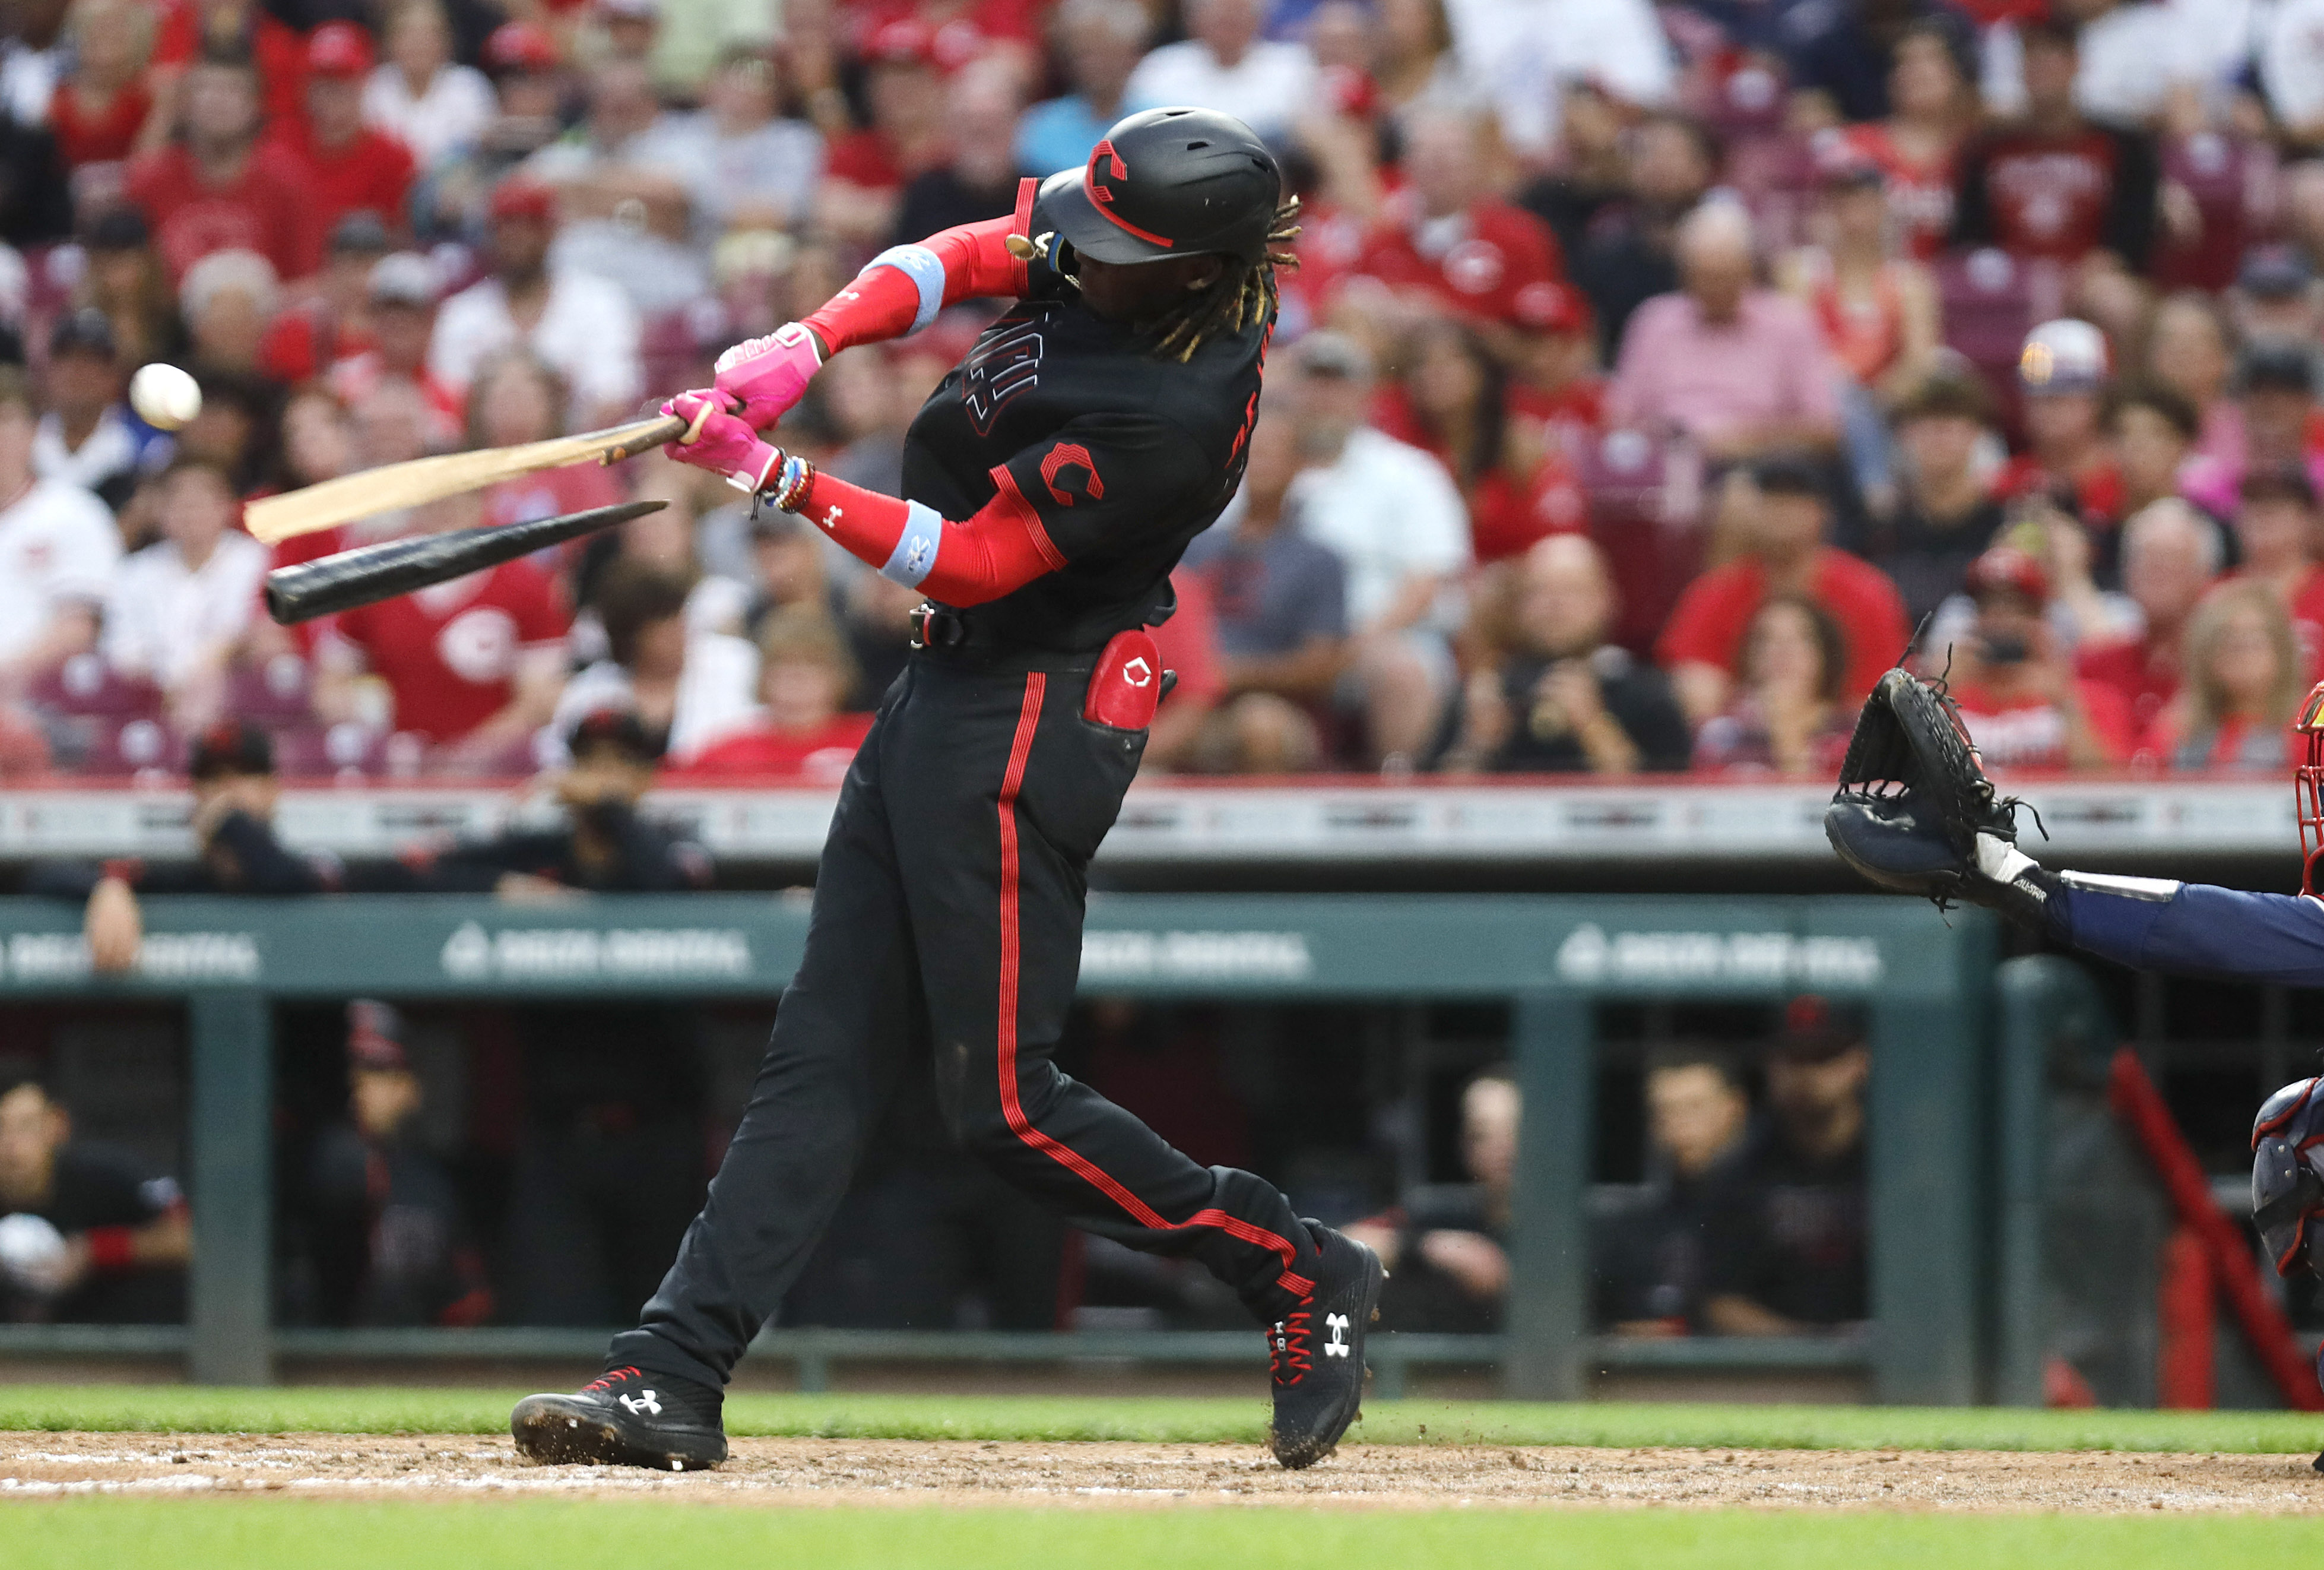 JJ Bleday hits first home run, Miami Marlins lose to Reds